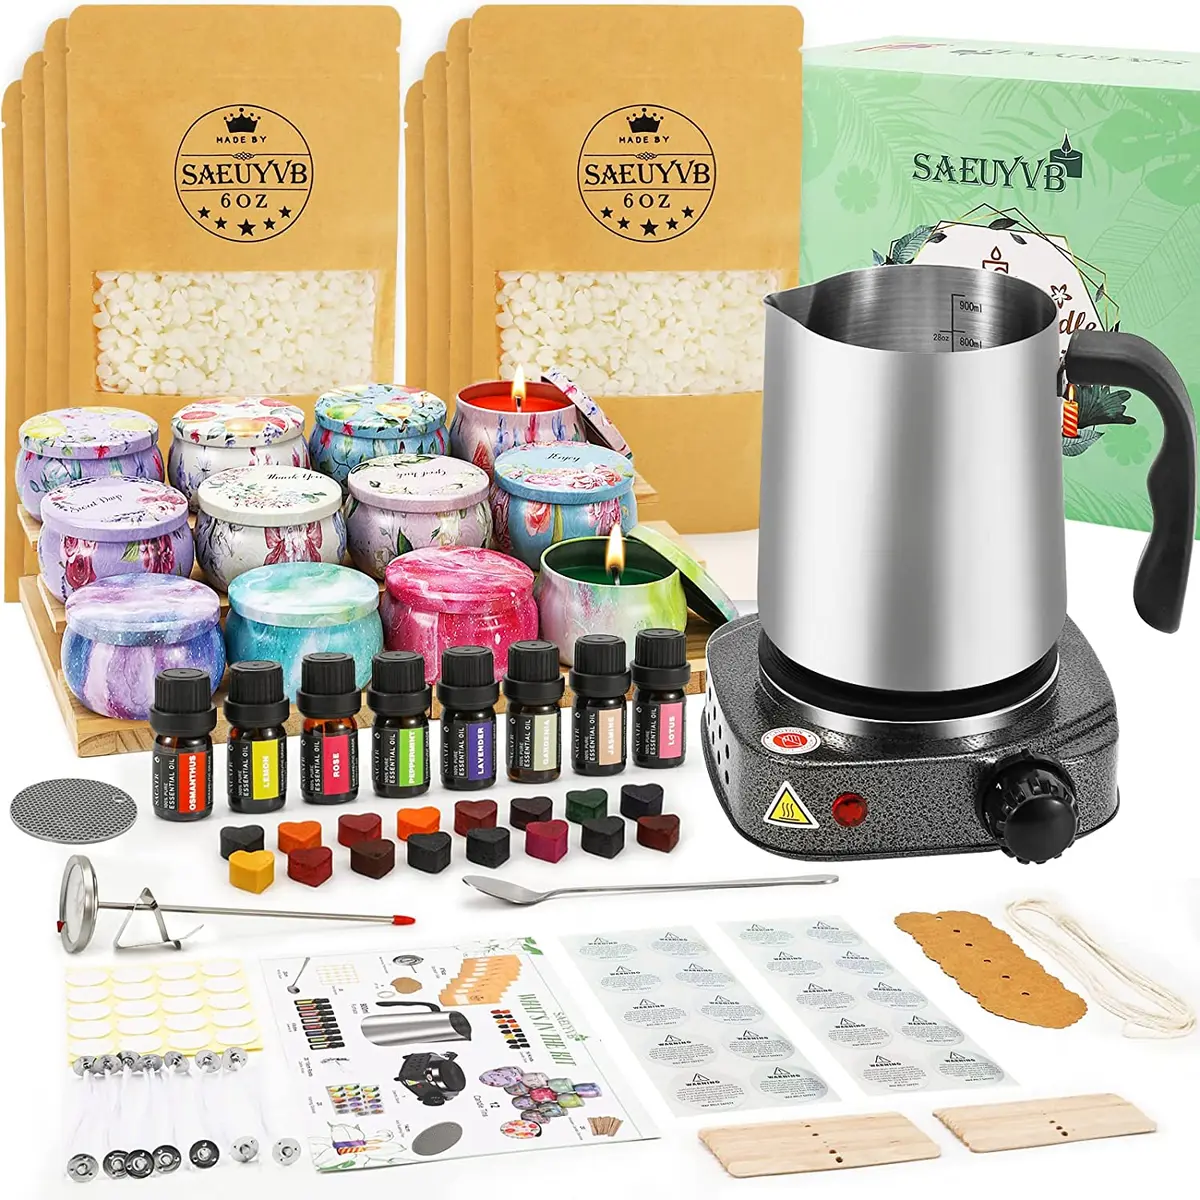 SAEUYVB Candle Making Kit for Adults - Full Set Candle Making